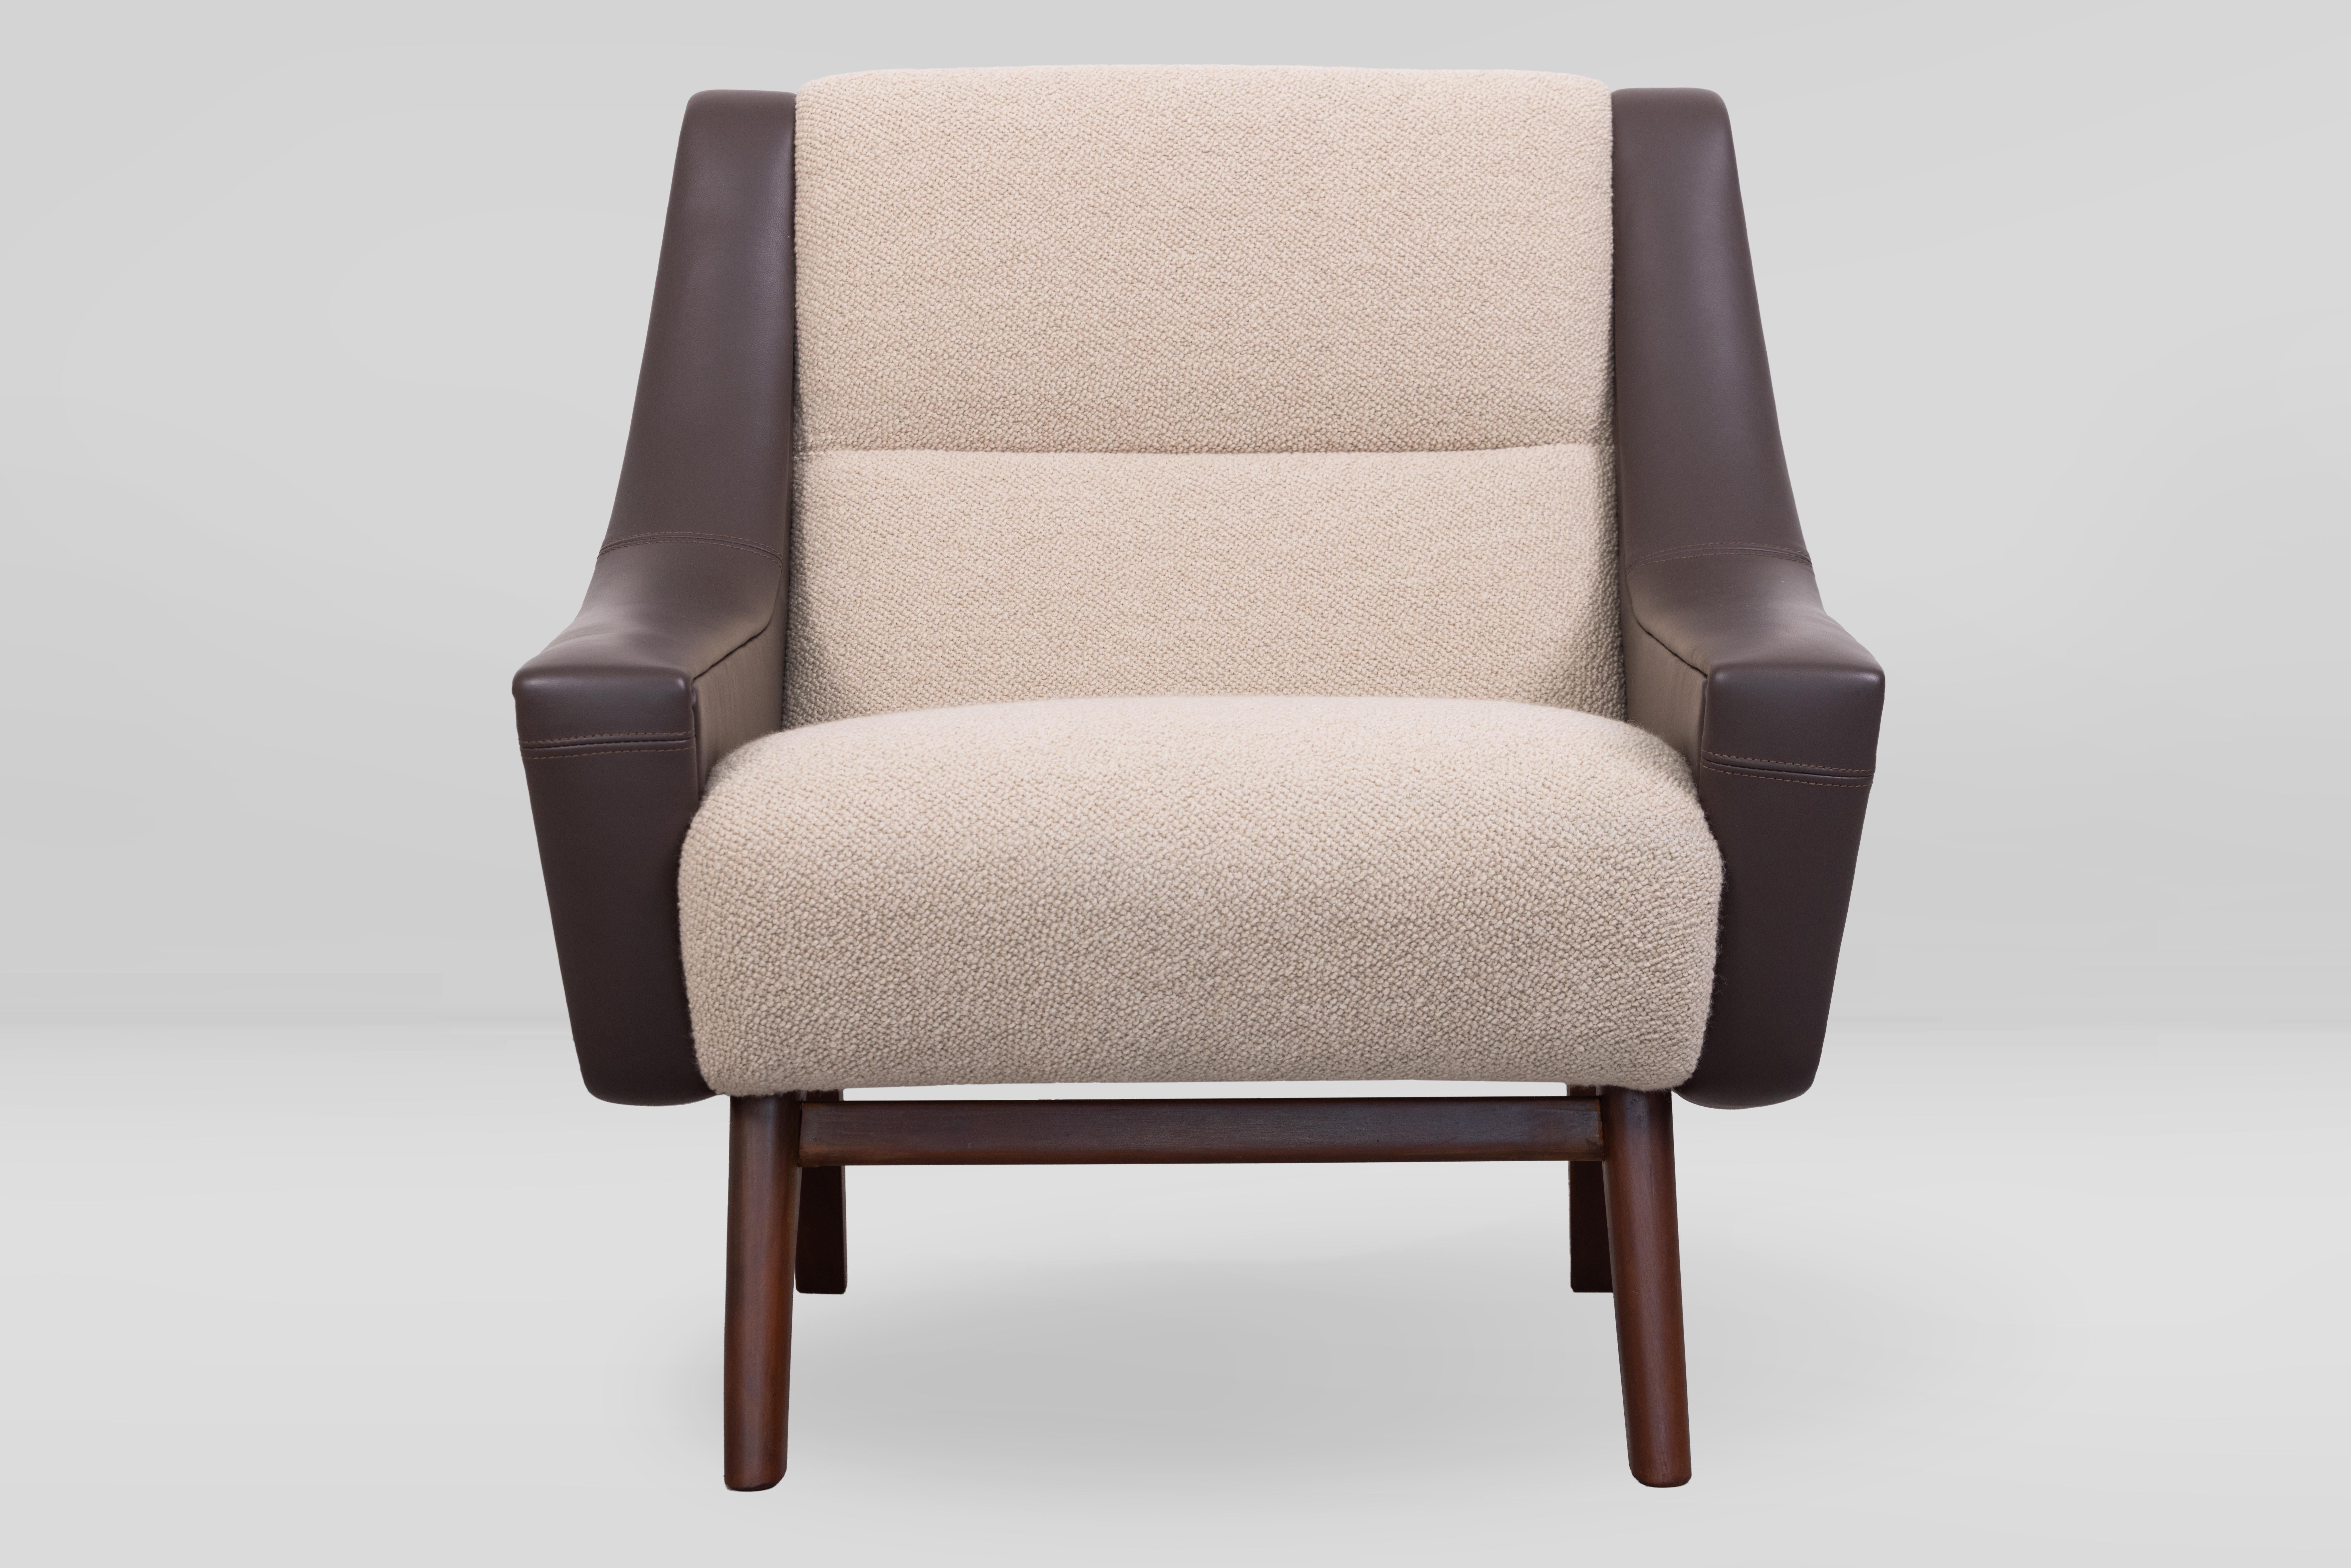 Mid-century lounge chair, Denmark 1960s, fully restored, legs in teak wood, new upholstered with the highest quality Italian leather and a light beige boucle’ by Larsen.